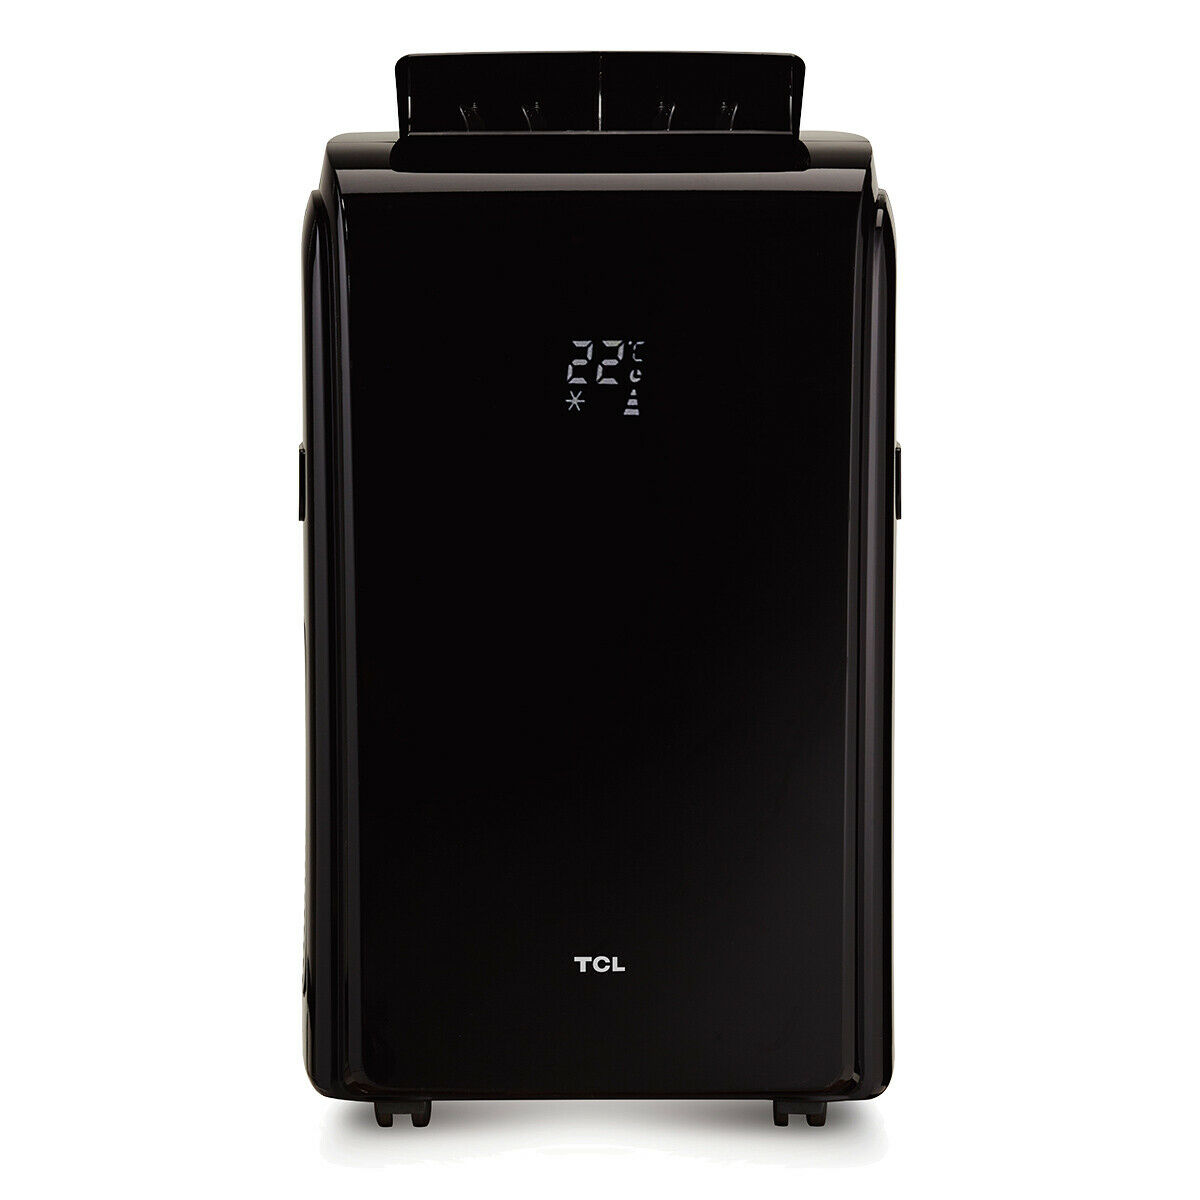 TCL 9000 TCL-09CPB-KB mobile air conditioner